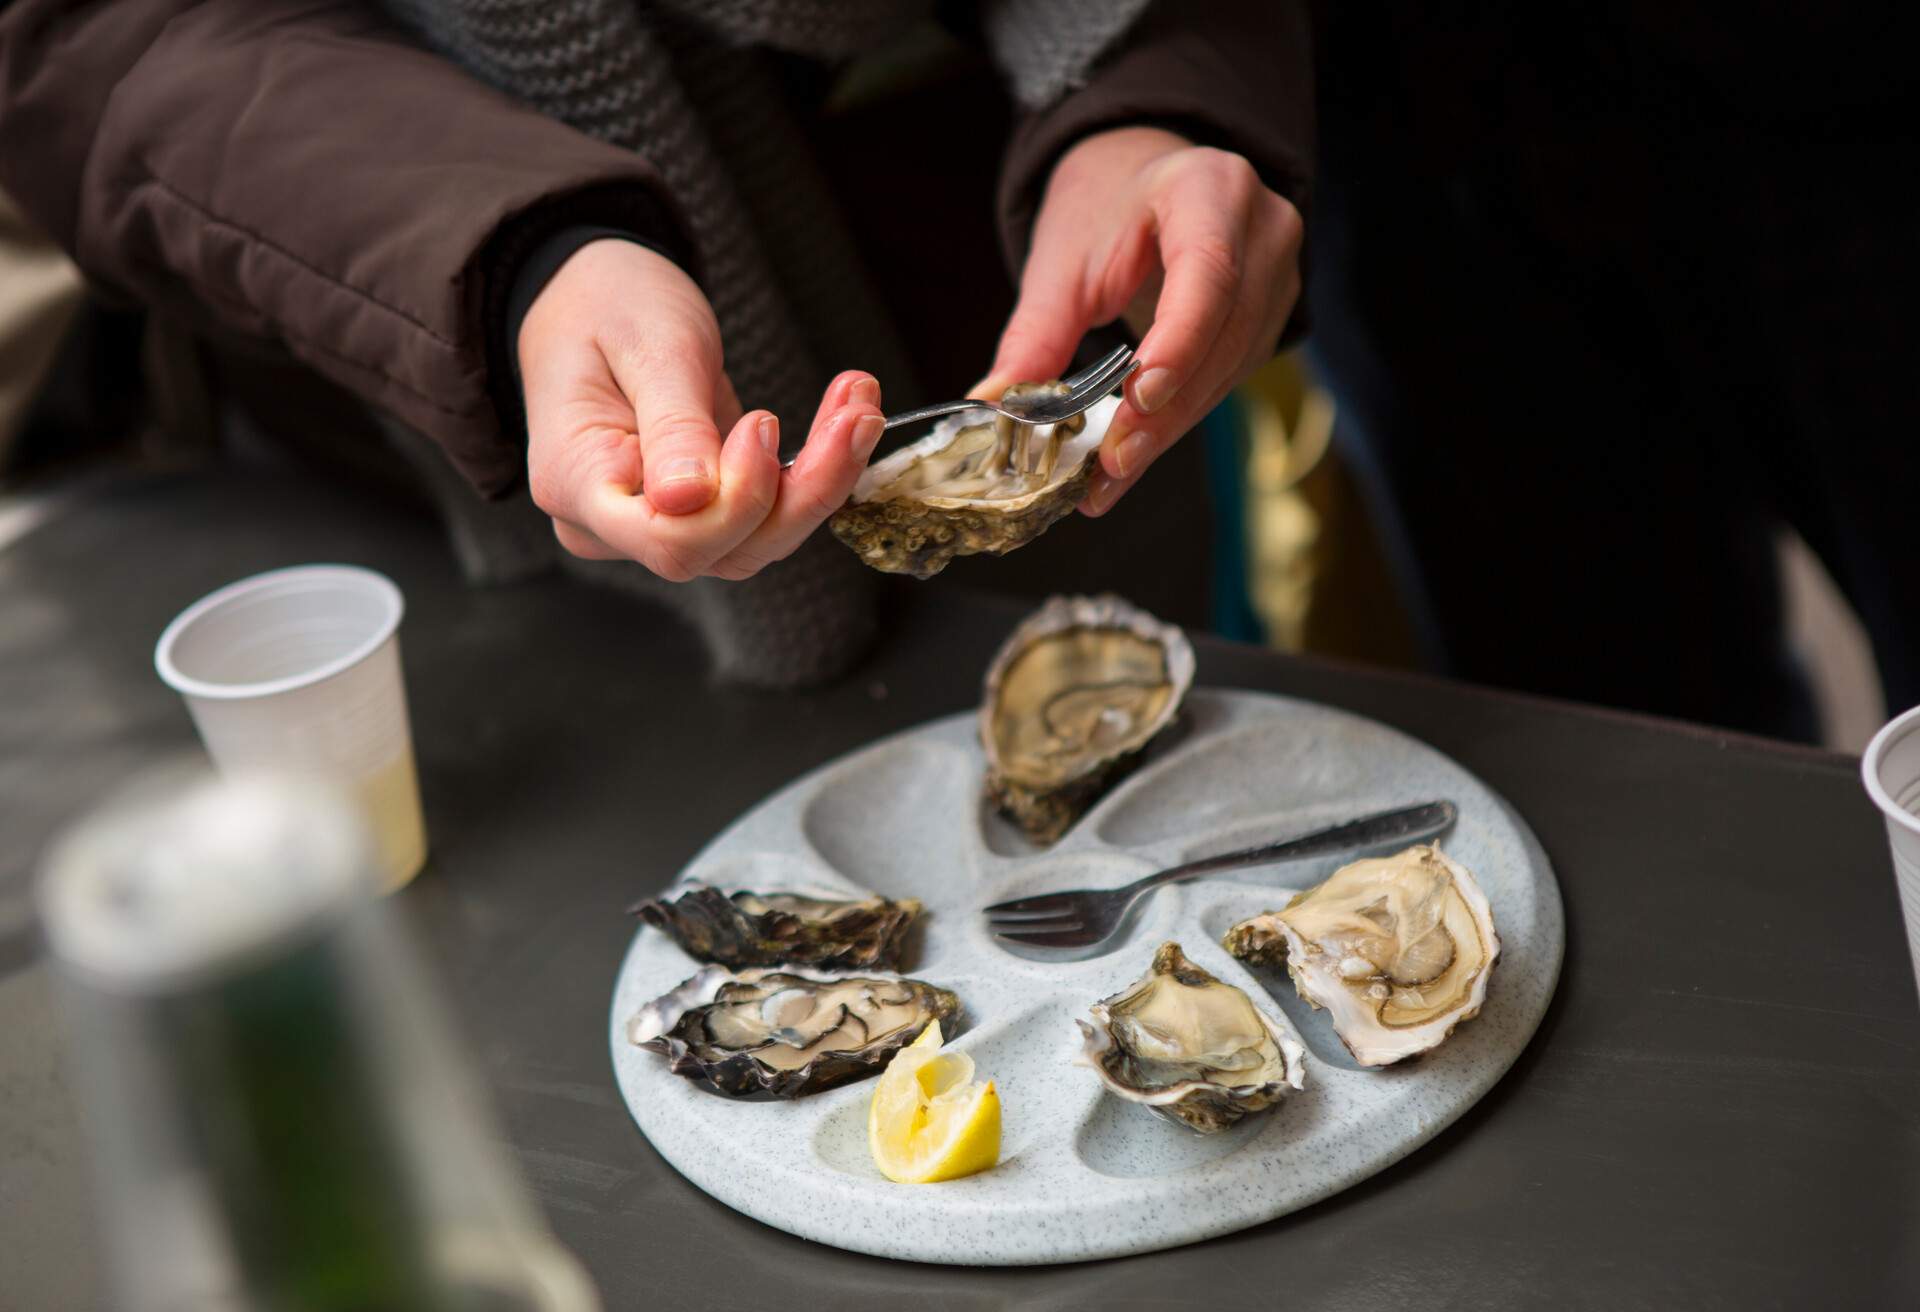 eating oysters on the half-shell at Sunday open air produce market at La Bastille, Paris